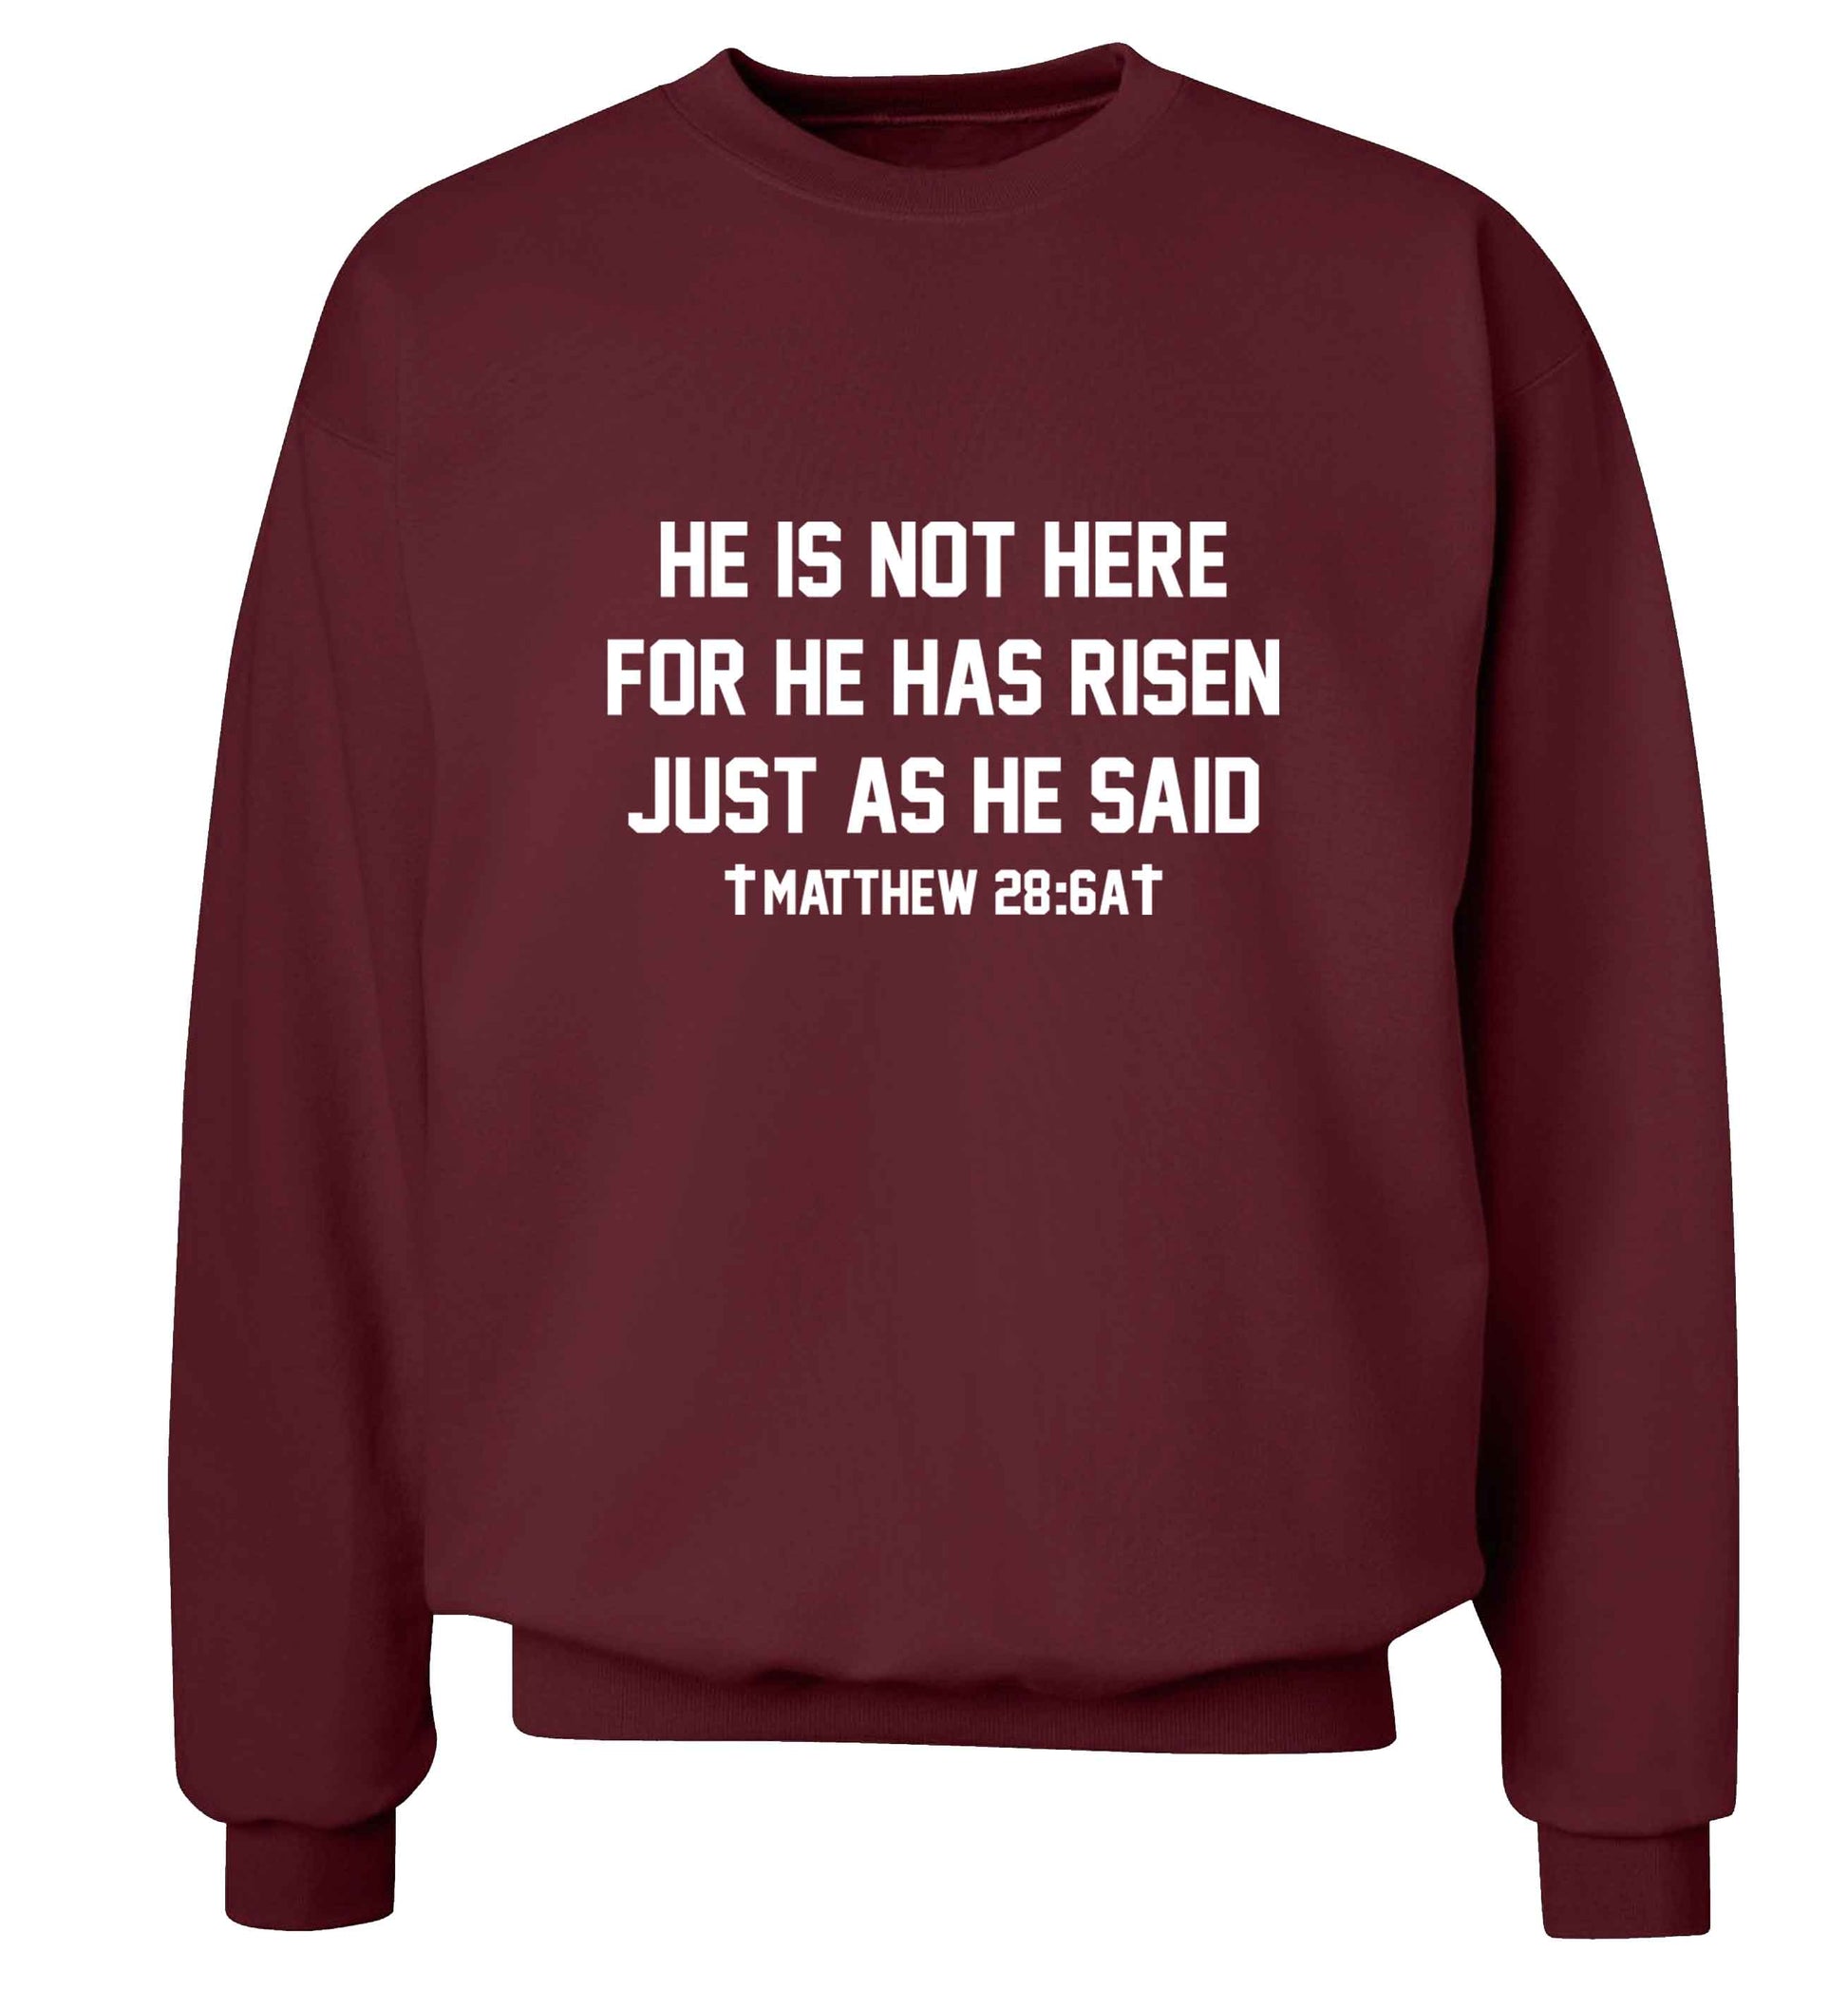 He is not here for he has risen just as he said matthew 28:6A adult's unisex maroon sweater 2XL